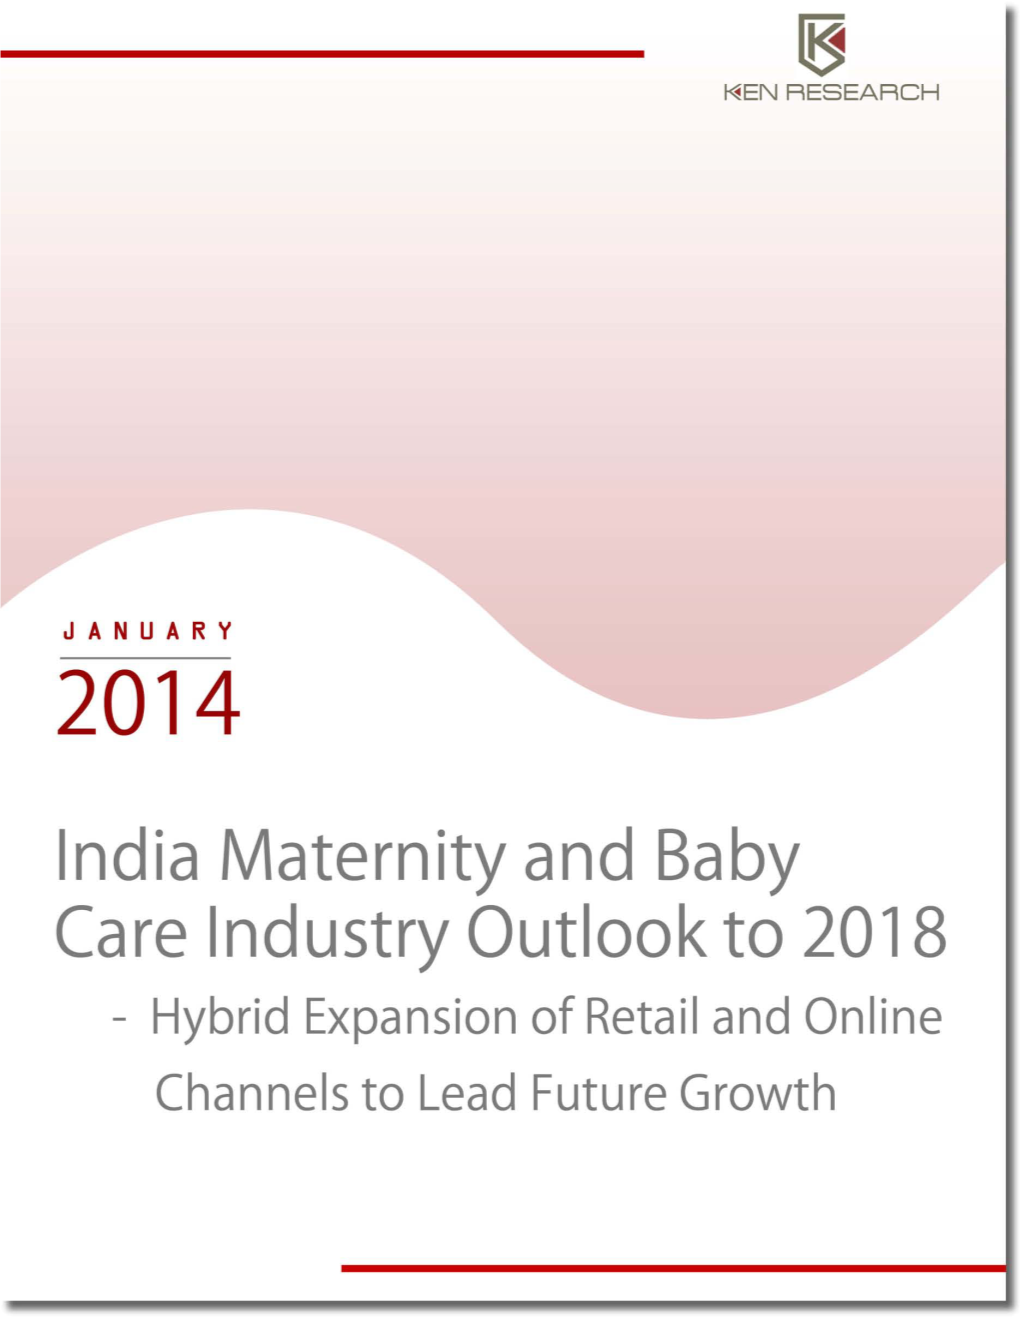 India Maternity and Baby Care Industry Outlook to 2018